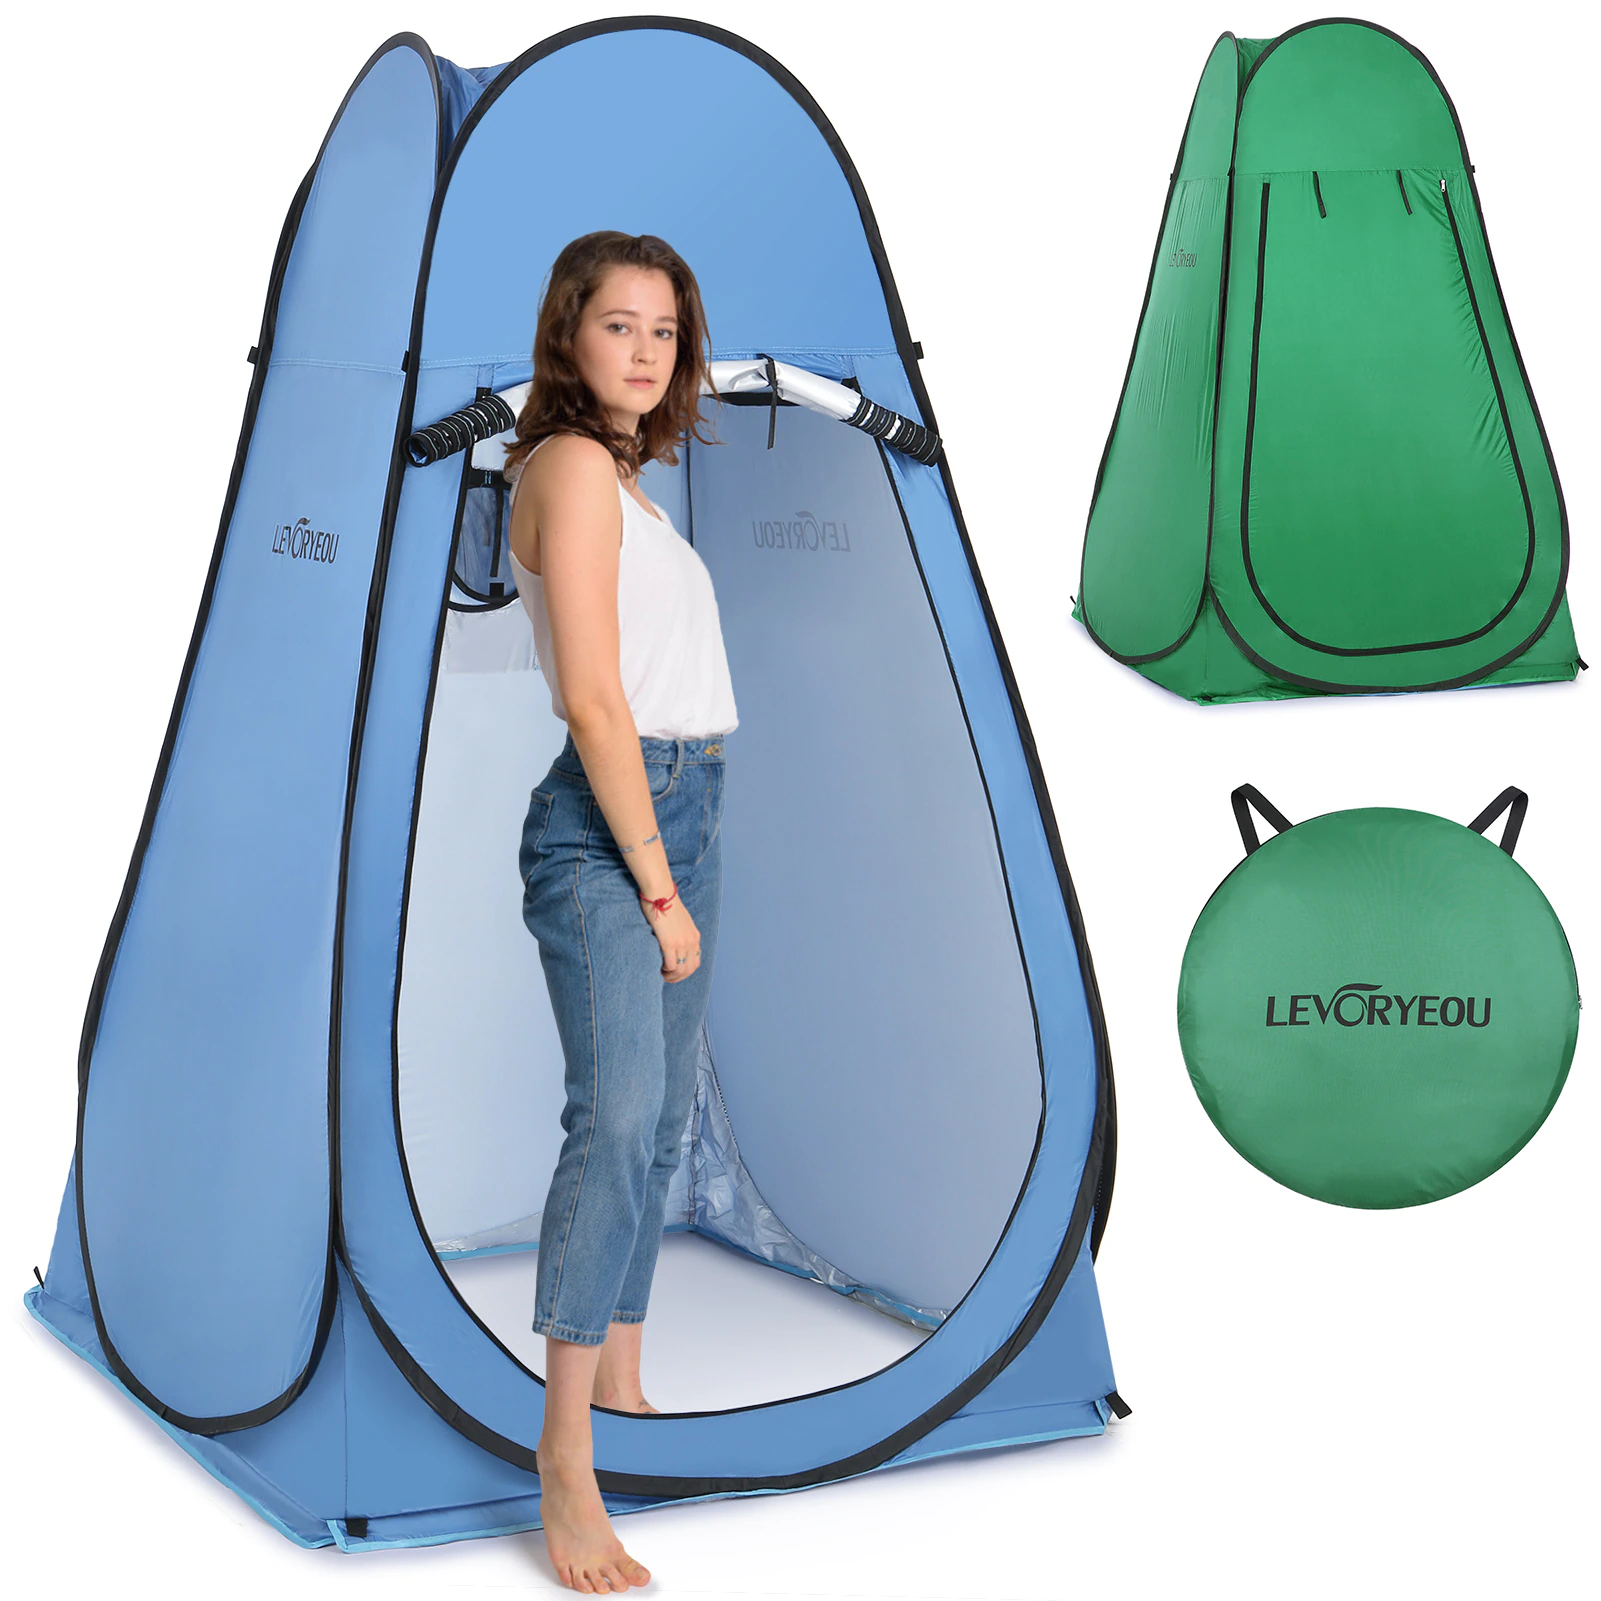 Cheap Goat Tents Popup Pod Changing Room Privacy Tent Portable Outdoor Shower Tent Camp Toilet Rain Shelter For Camping Beach Self driving Travel   